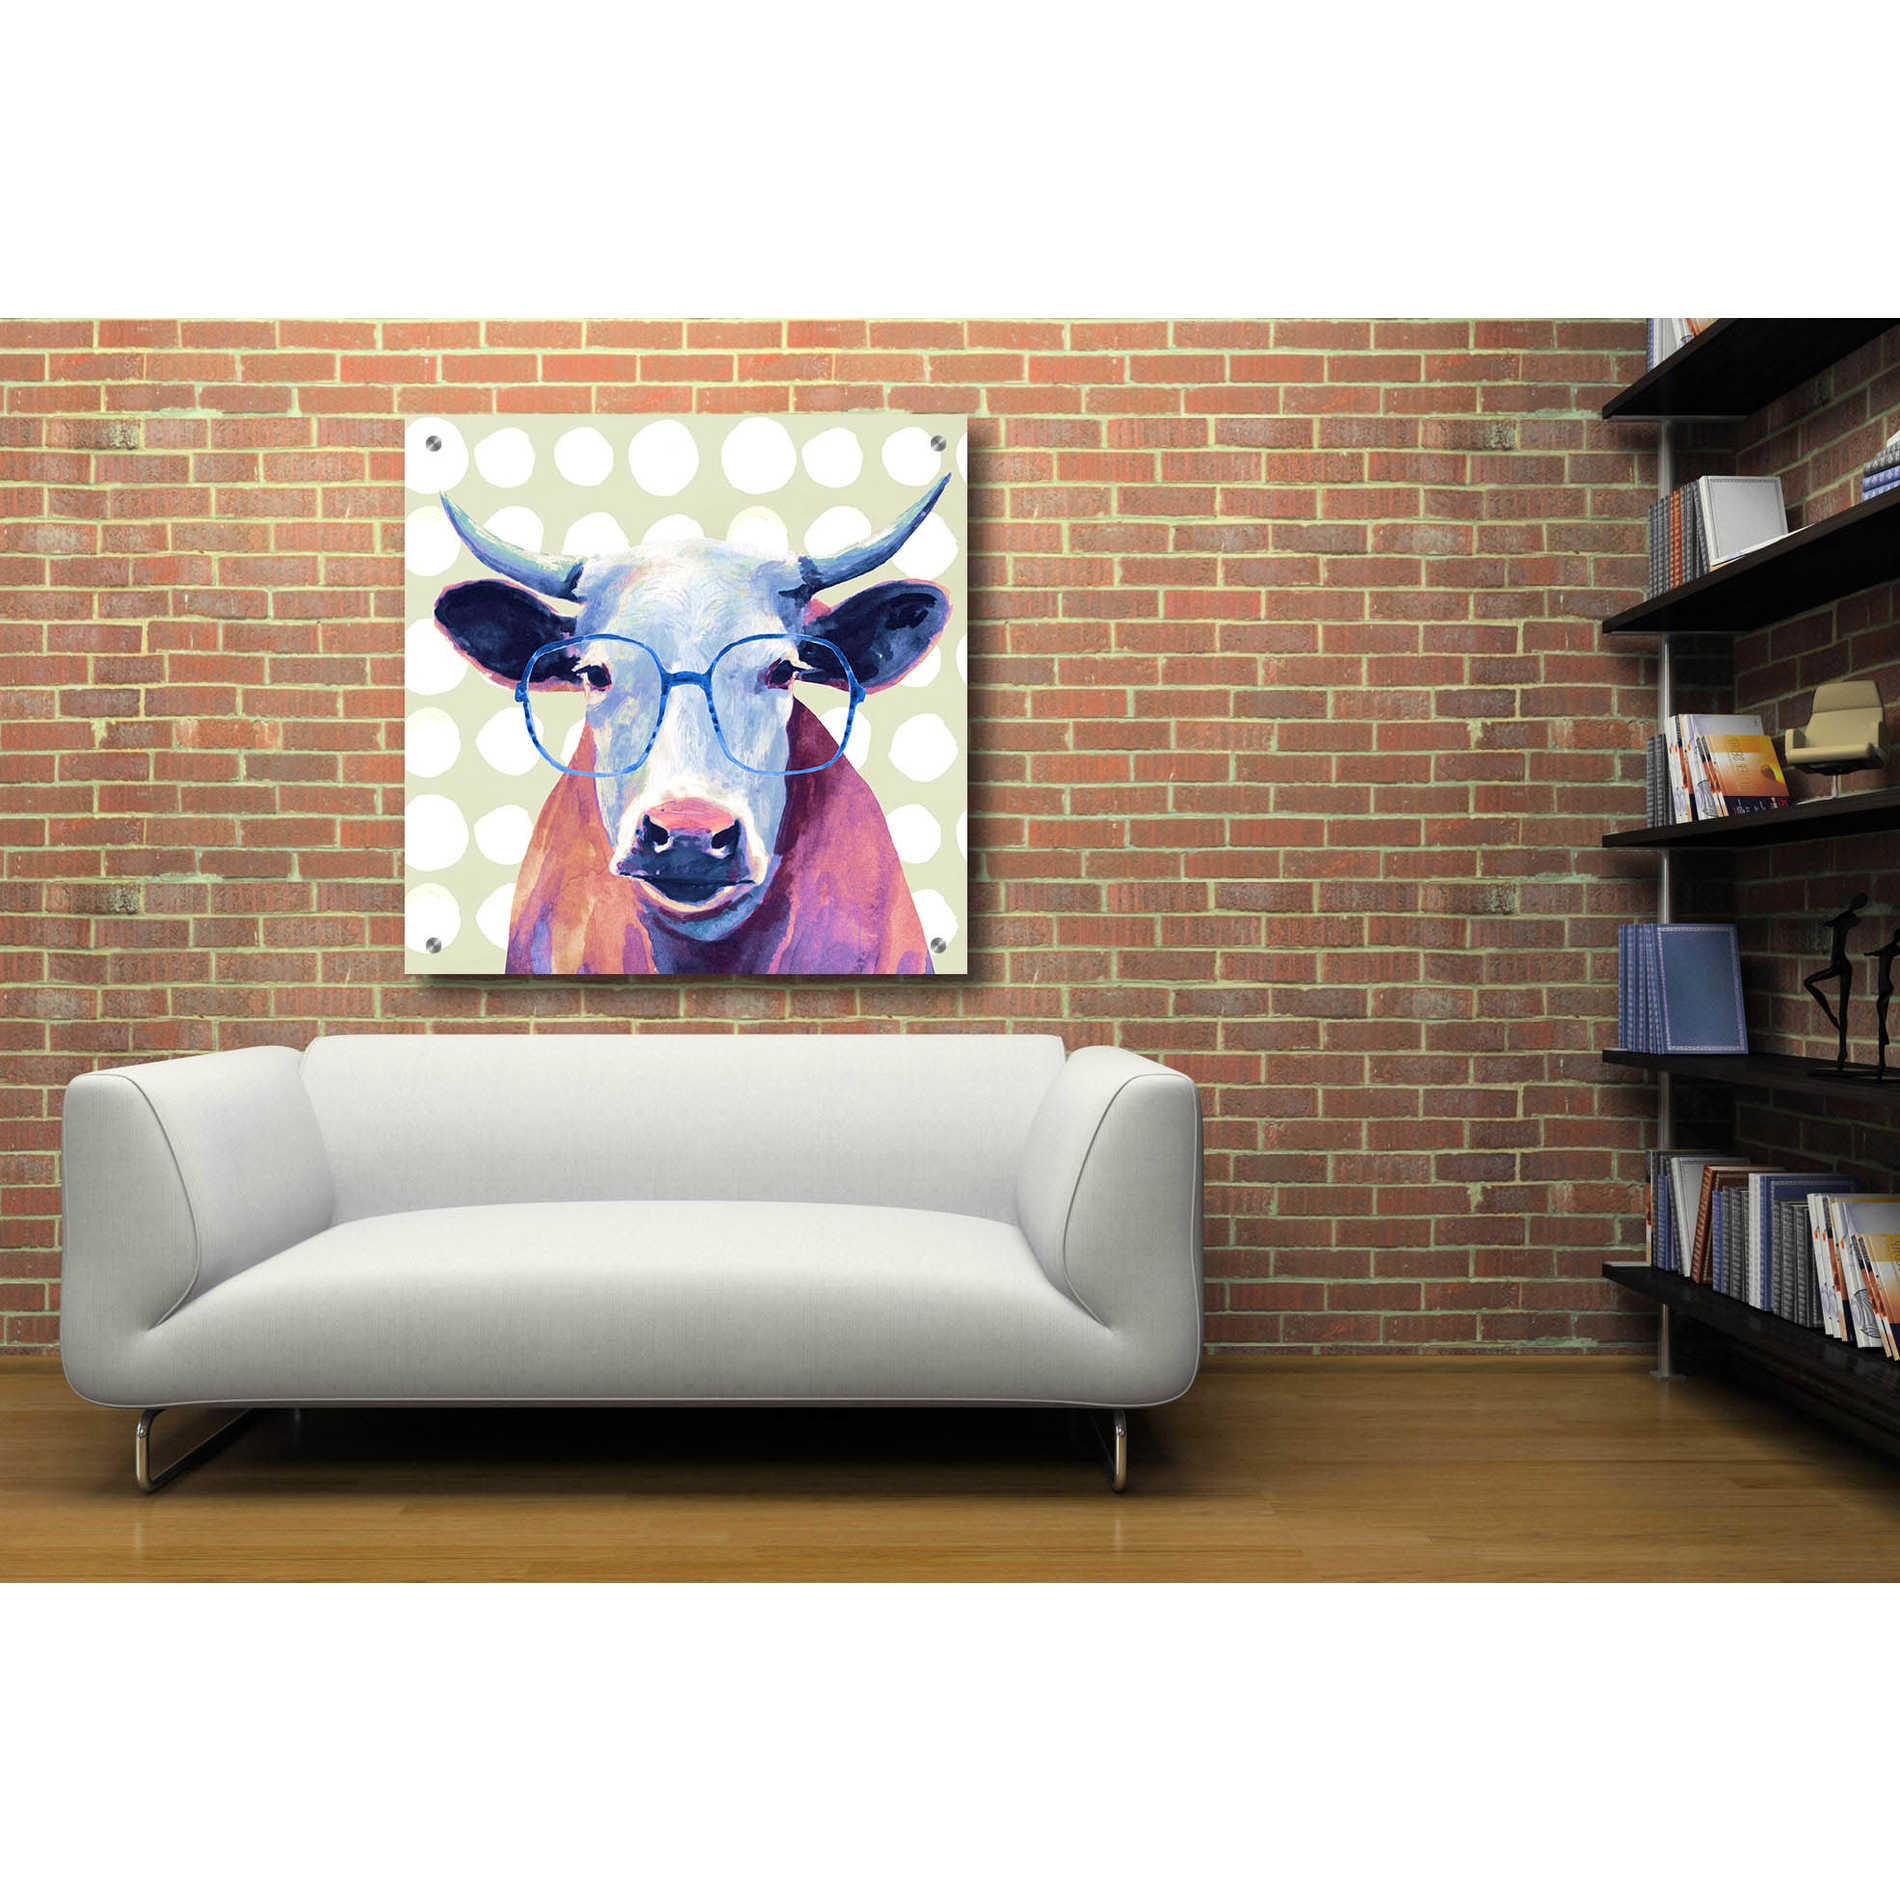 Epic Art 'Bespectacled Bovine II' by Victoria Borges, Acrylic Glass Wall Art,36x36